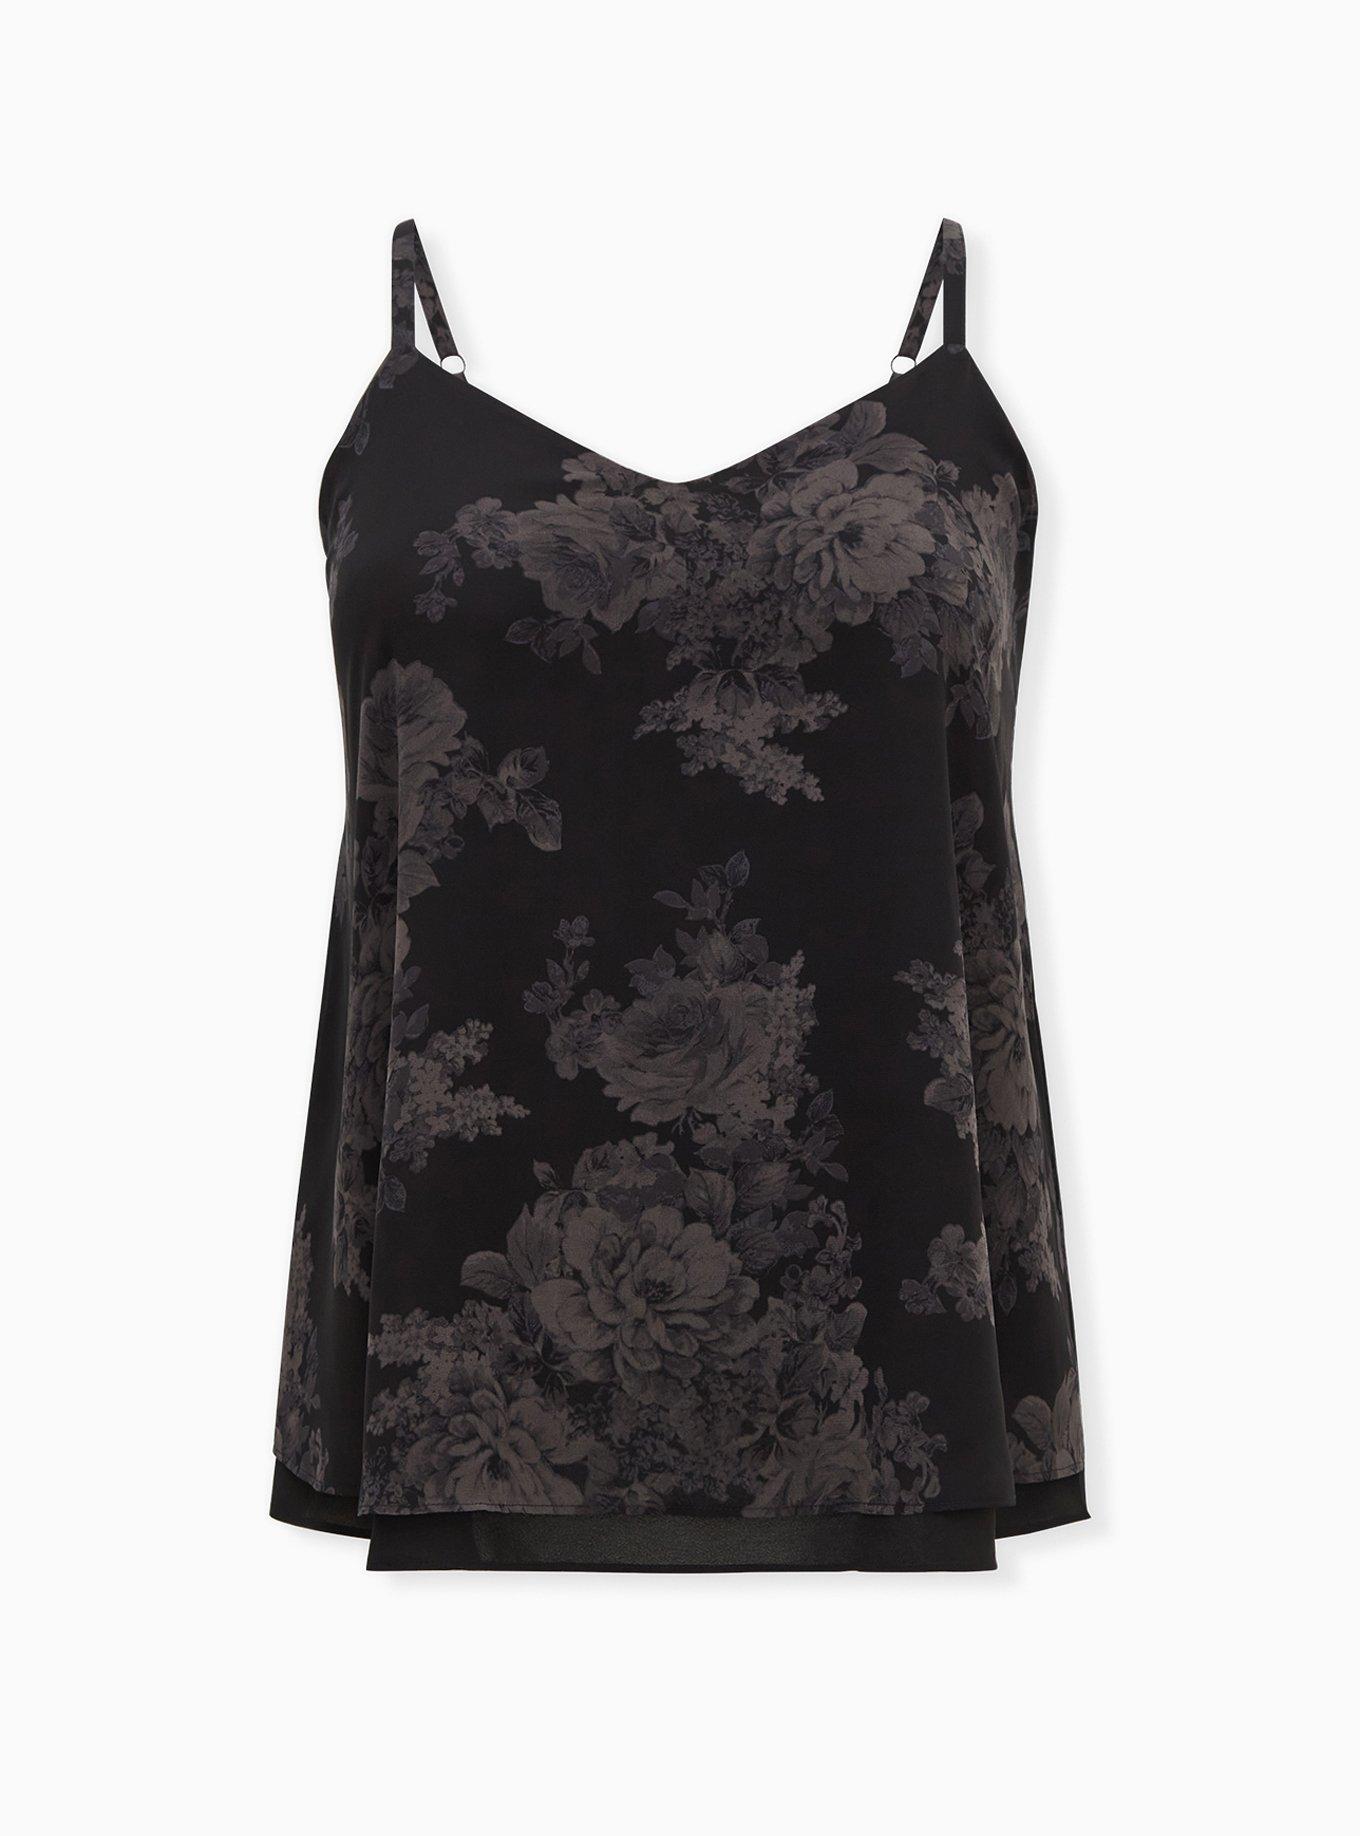 WHITE House Black Market Lace Camisole in 2023